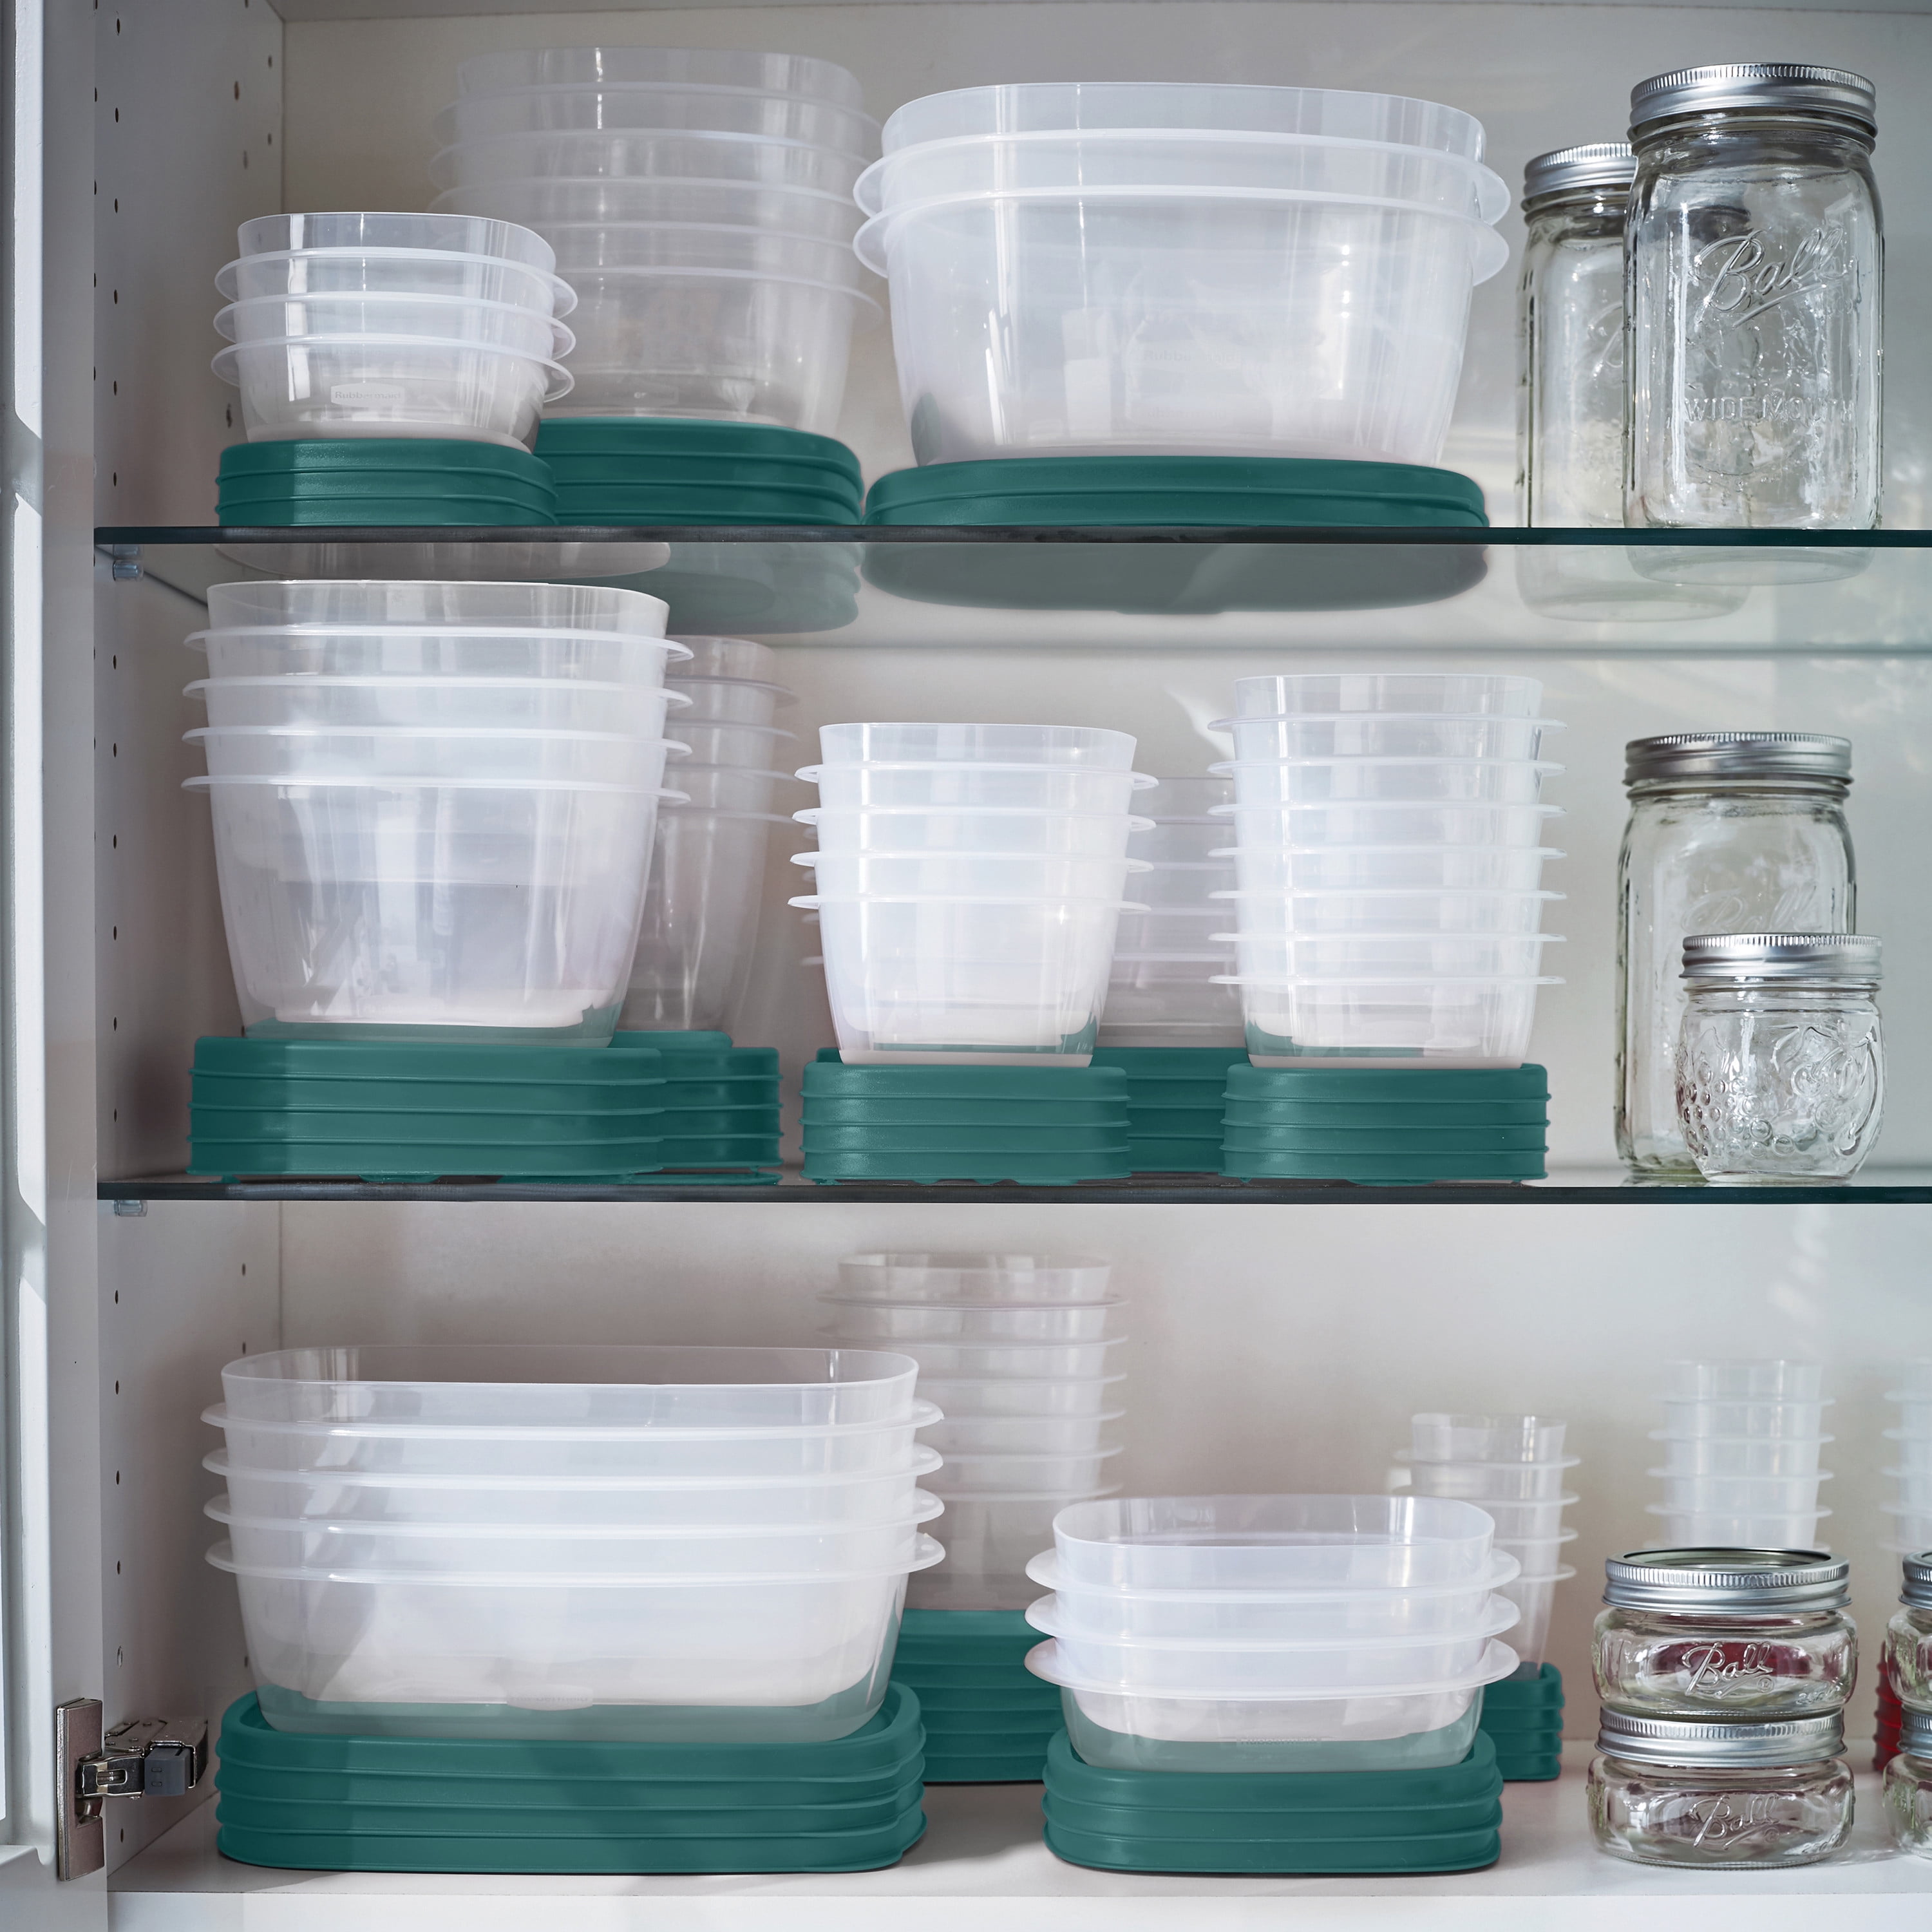 $24.99! beat that Rubbermaid! 60 piece set includes microwave safe  containers and measuring spoons. Yes I'm a little bitter because I…